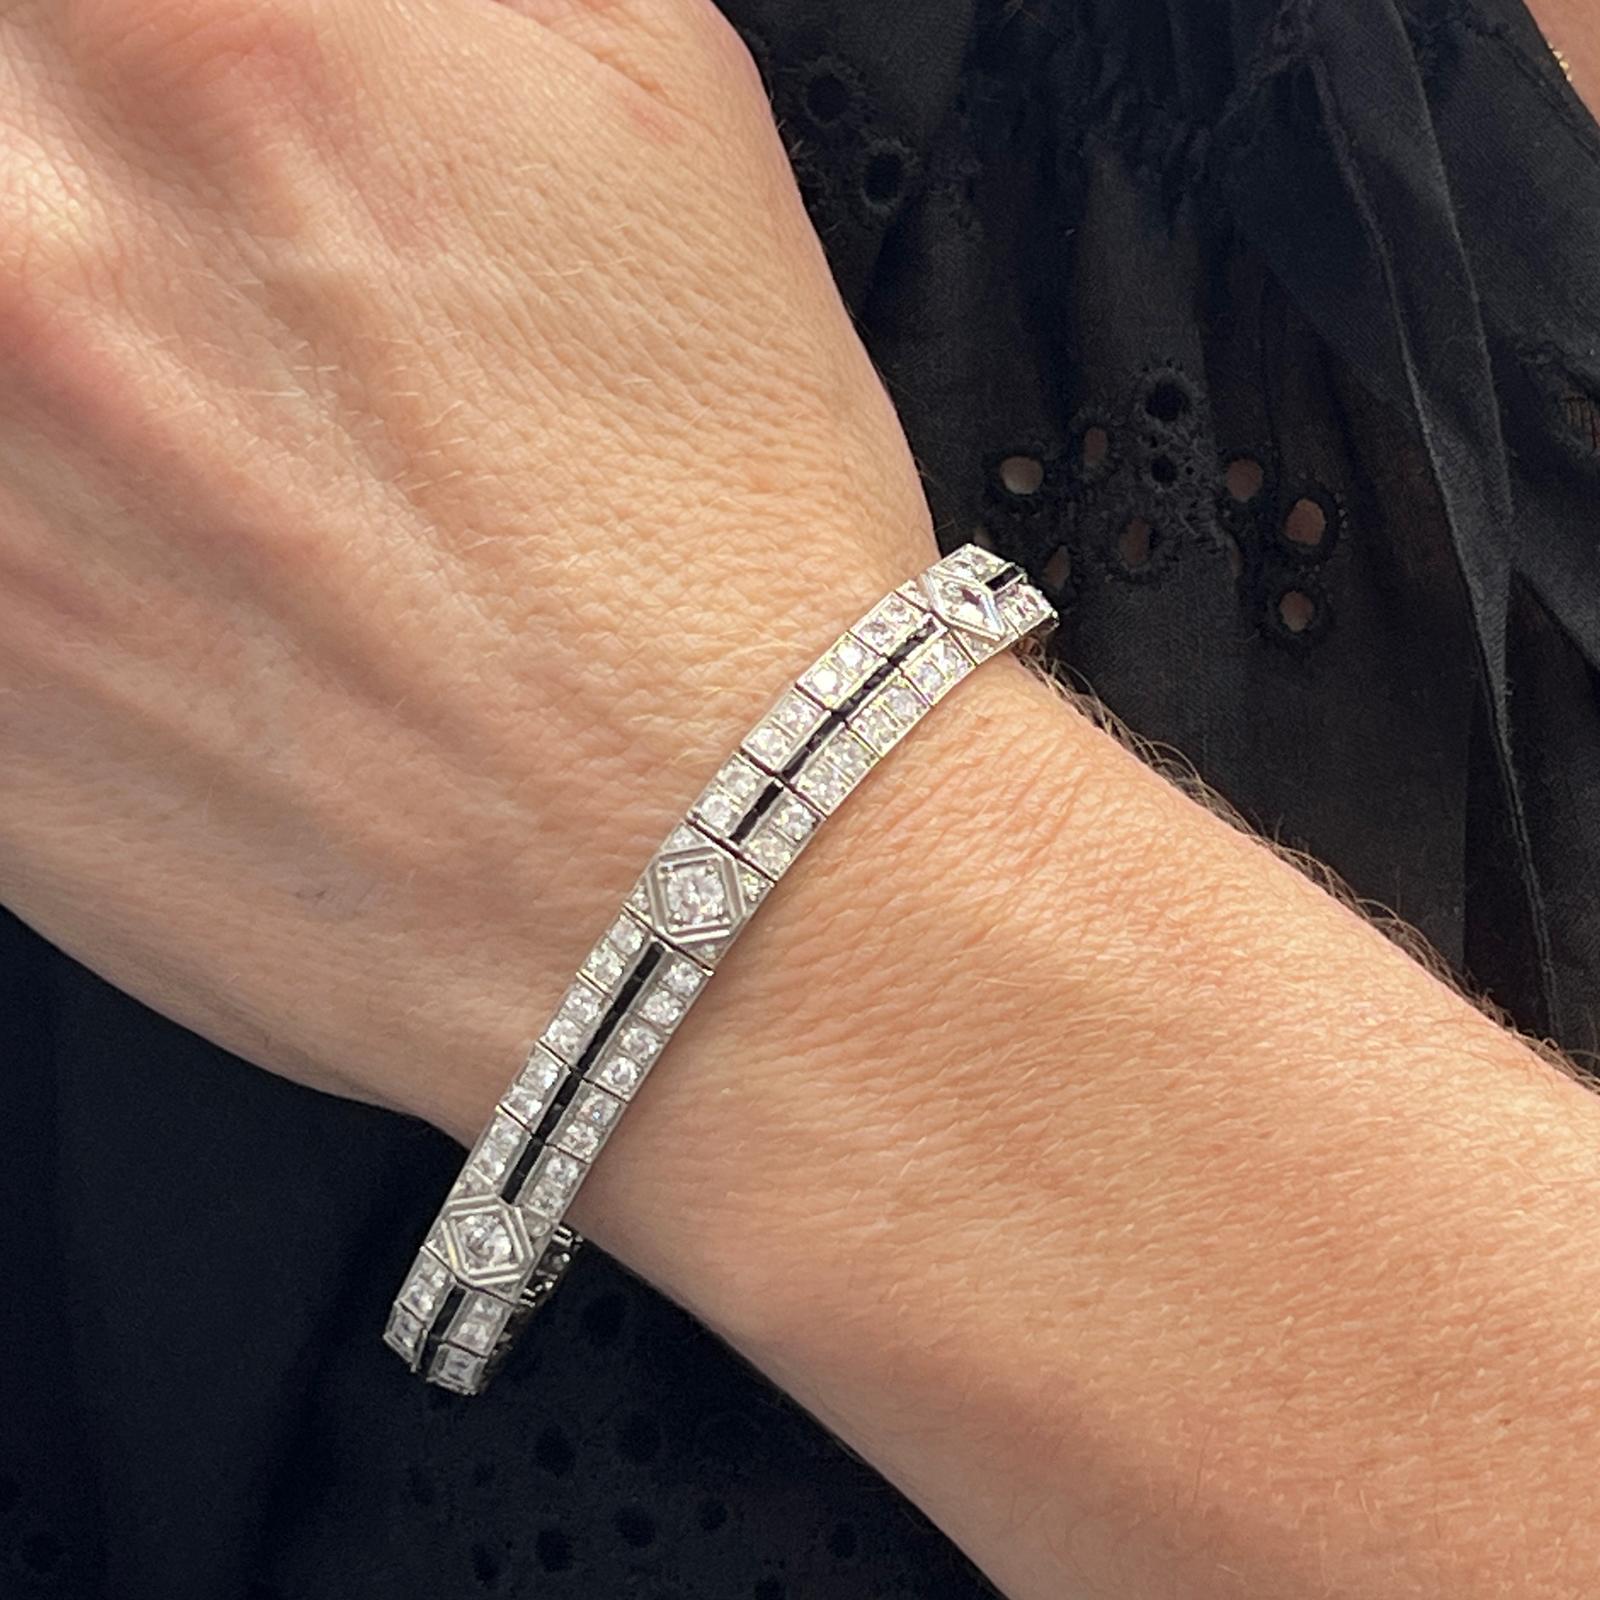 Stunning Late Deco diamond and sapphire bracelet handcrafted in platinum. The bracelet features 6 round brilliant cut center diamonds weighing approximately 1.50 CTW and another 120 round brilliant diamonds weighing approximately 5.00 CTW. The